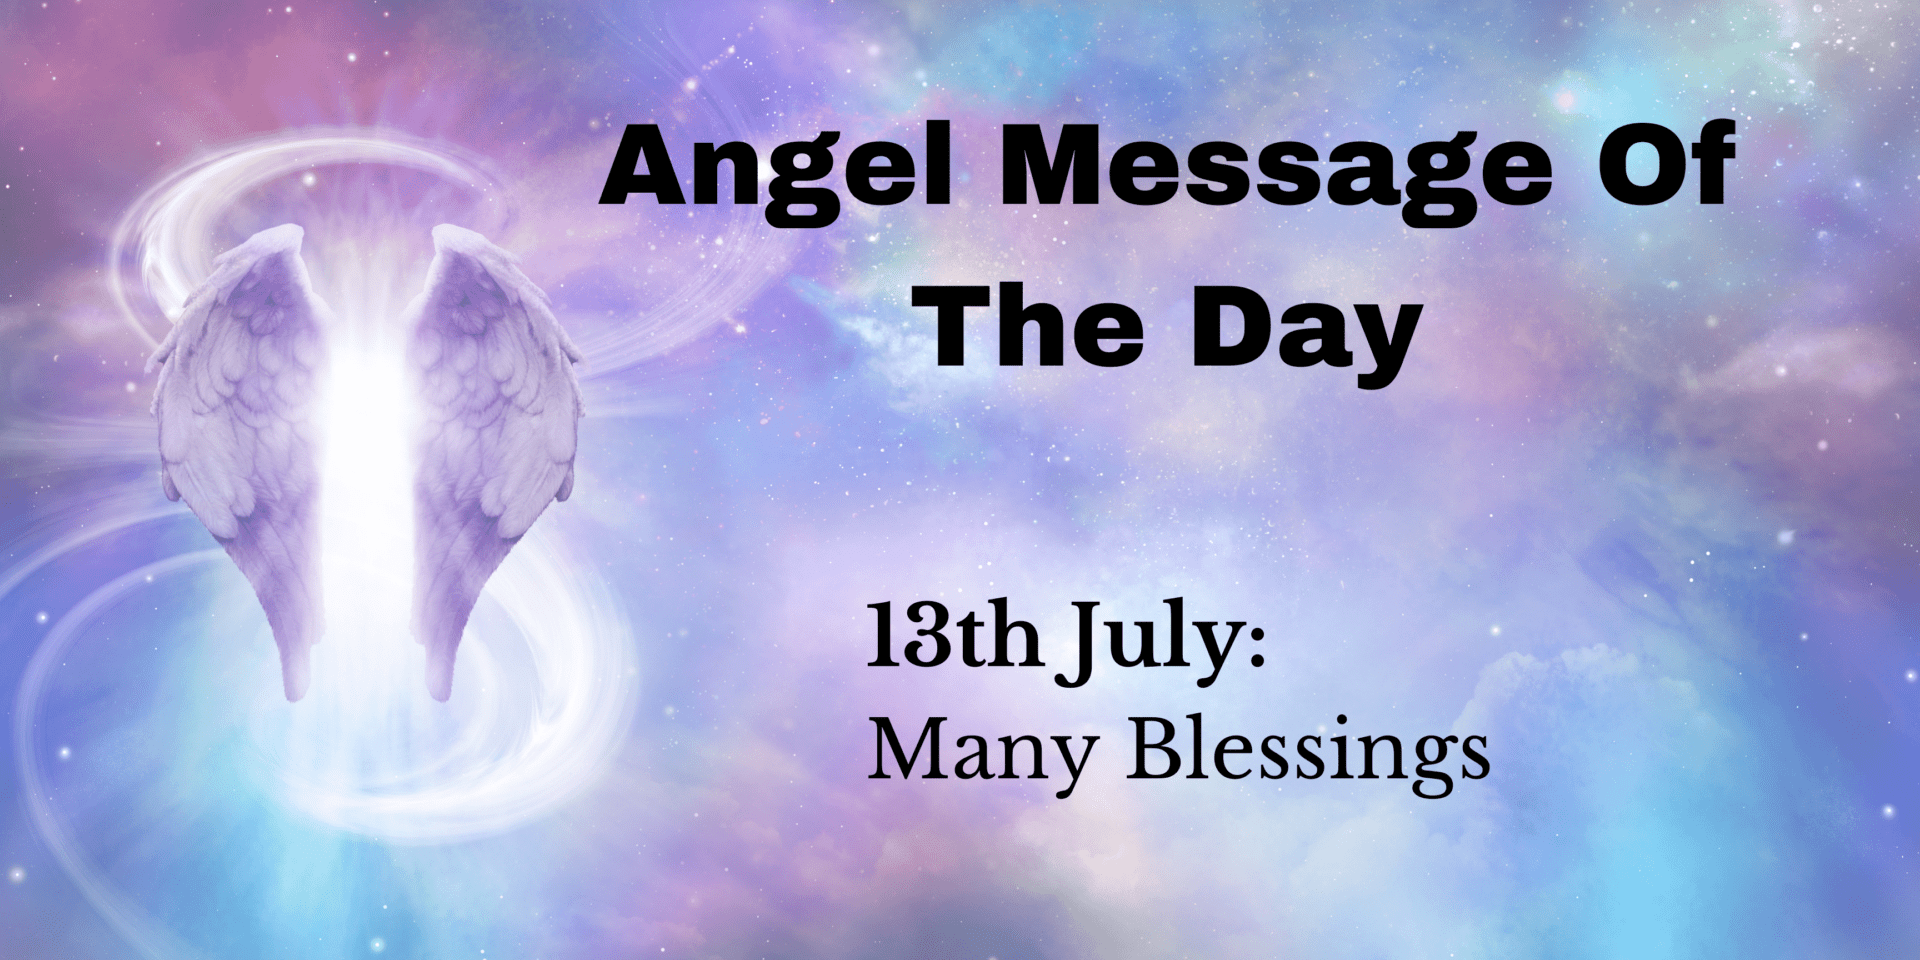 angel message of the day : many blessings